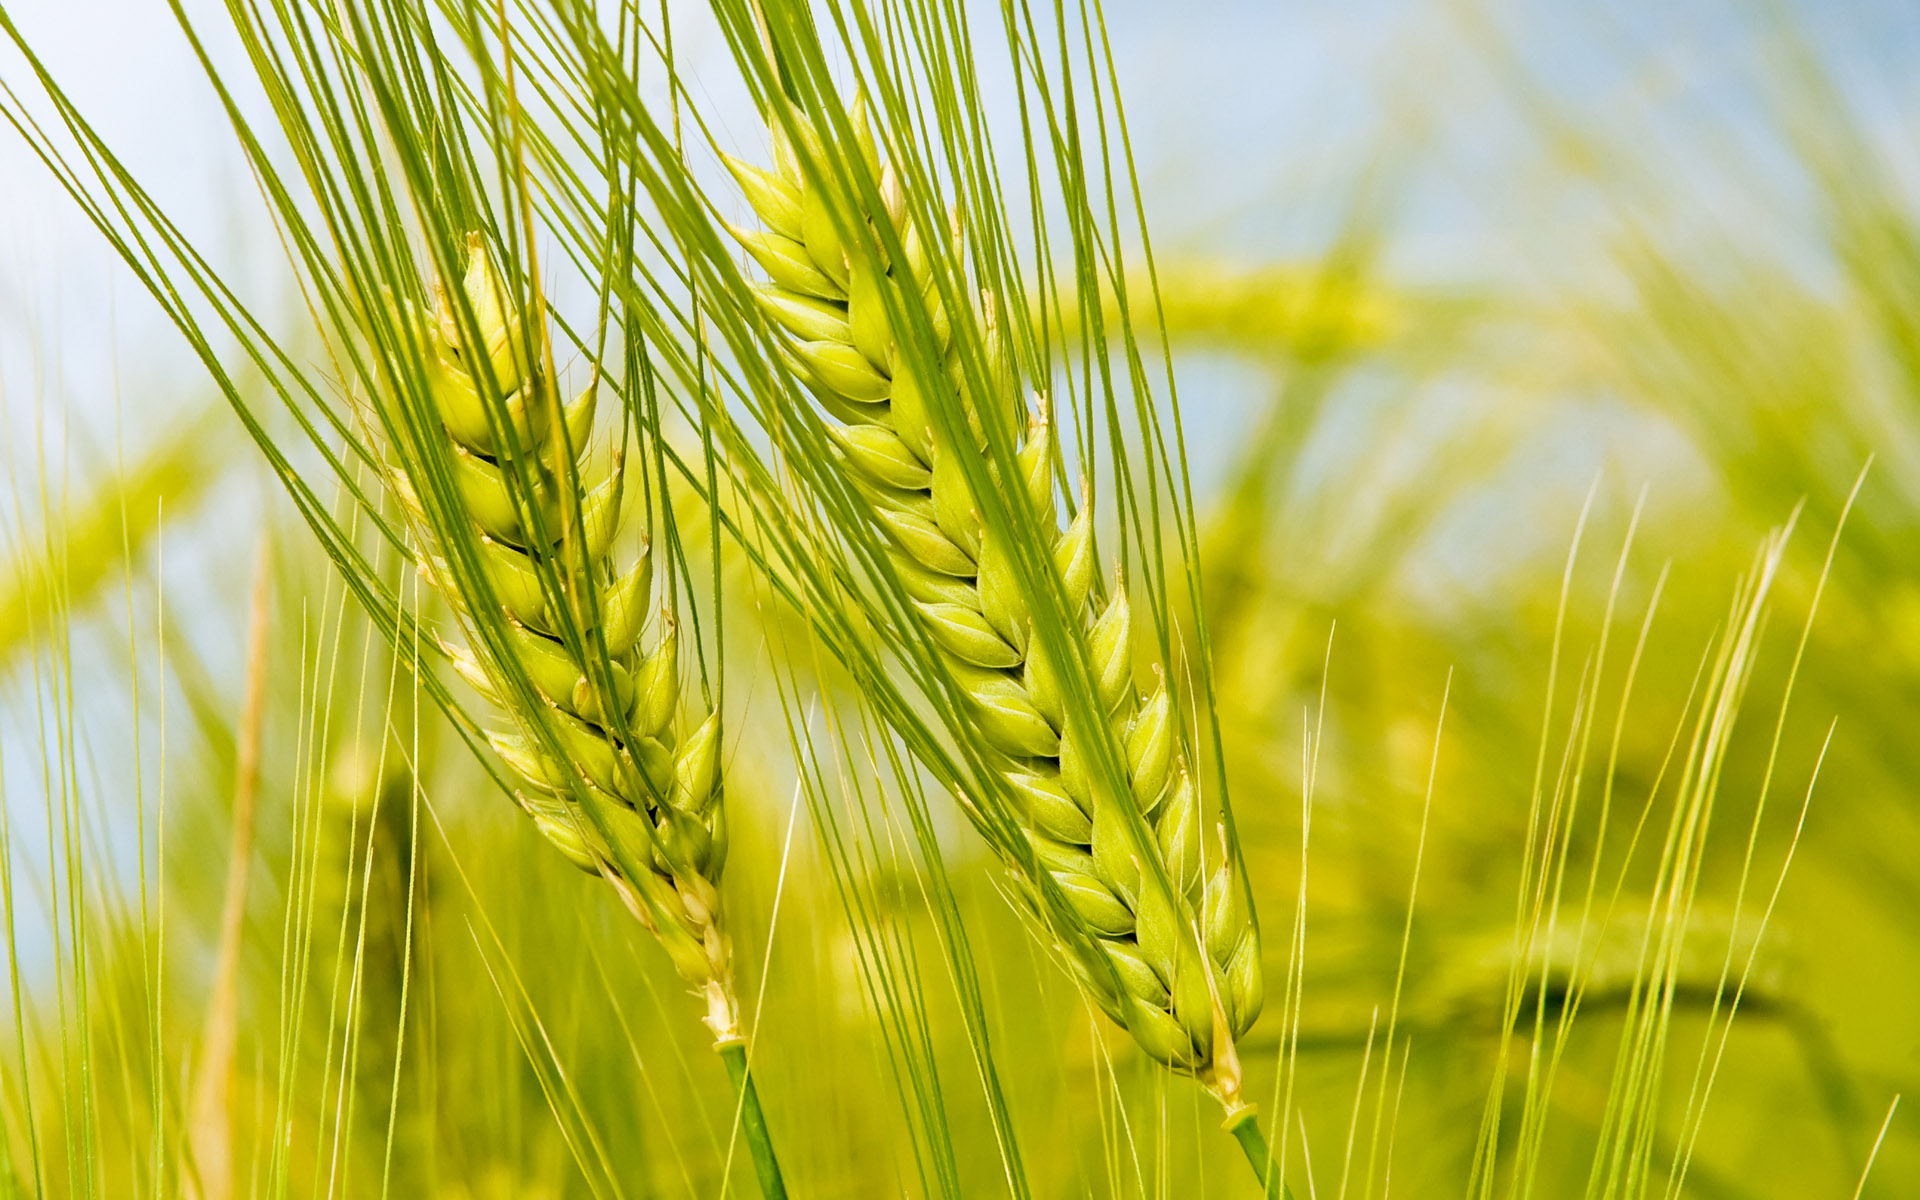 Wheat Cultivation Set to Begin